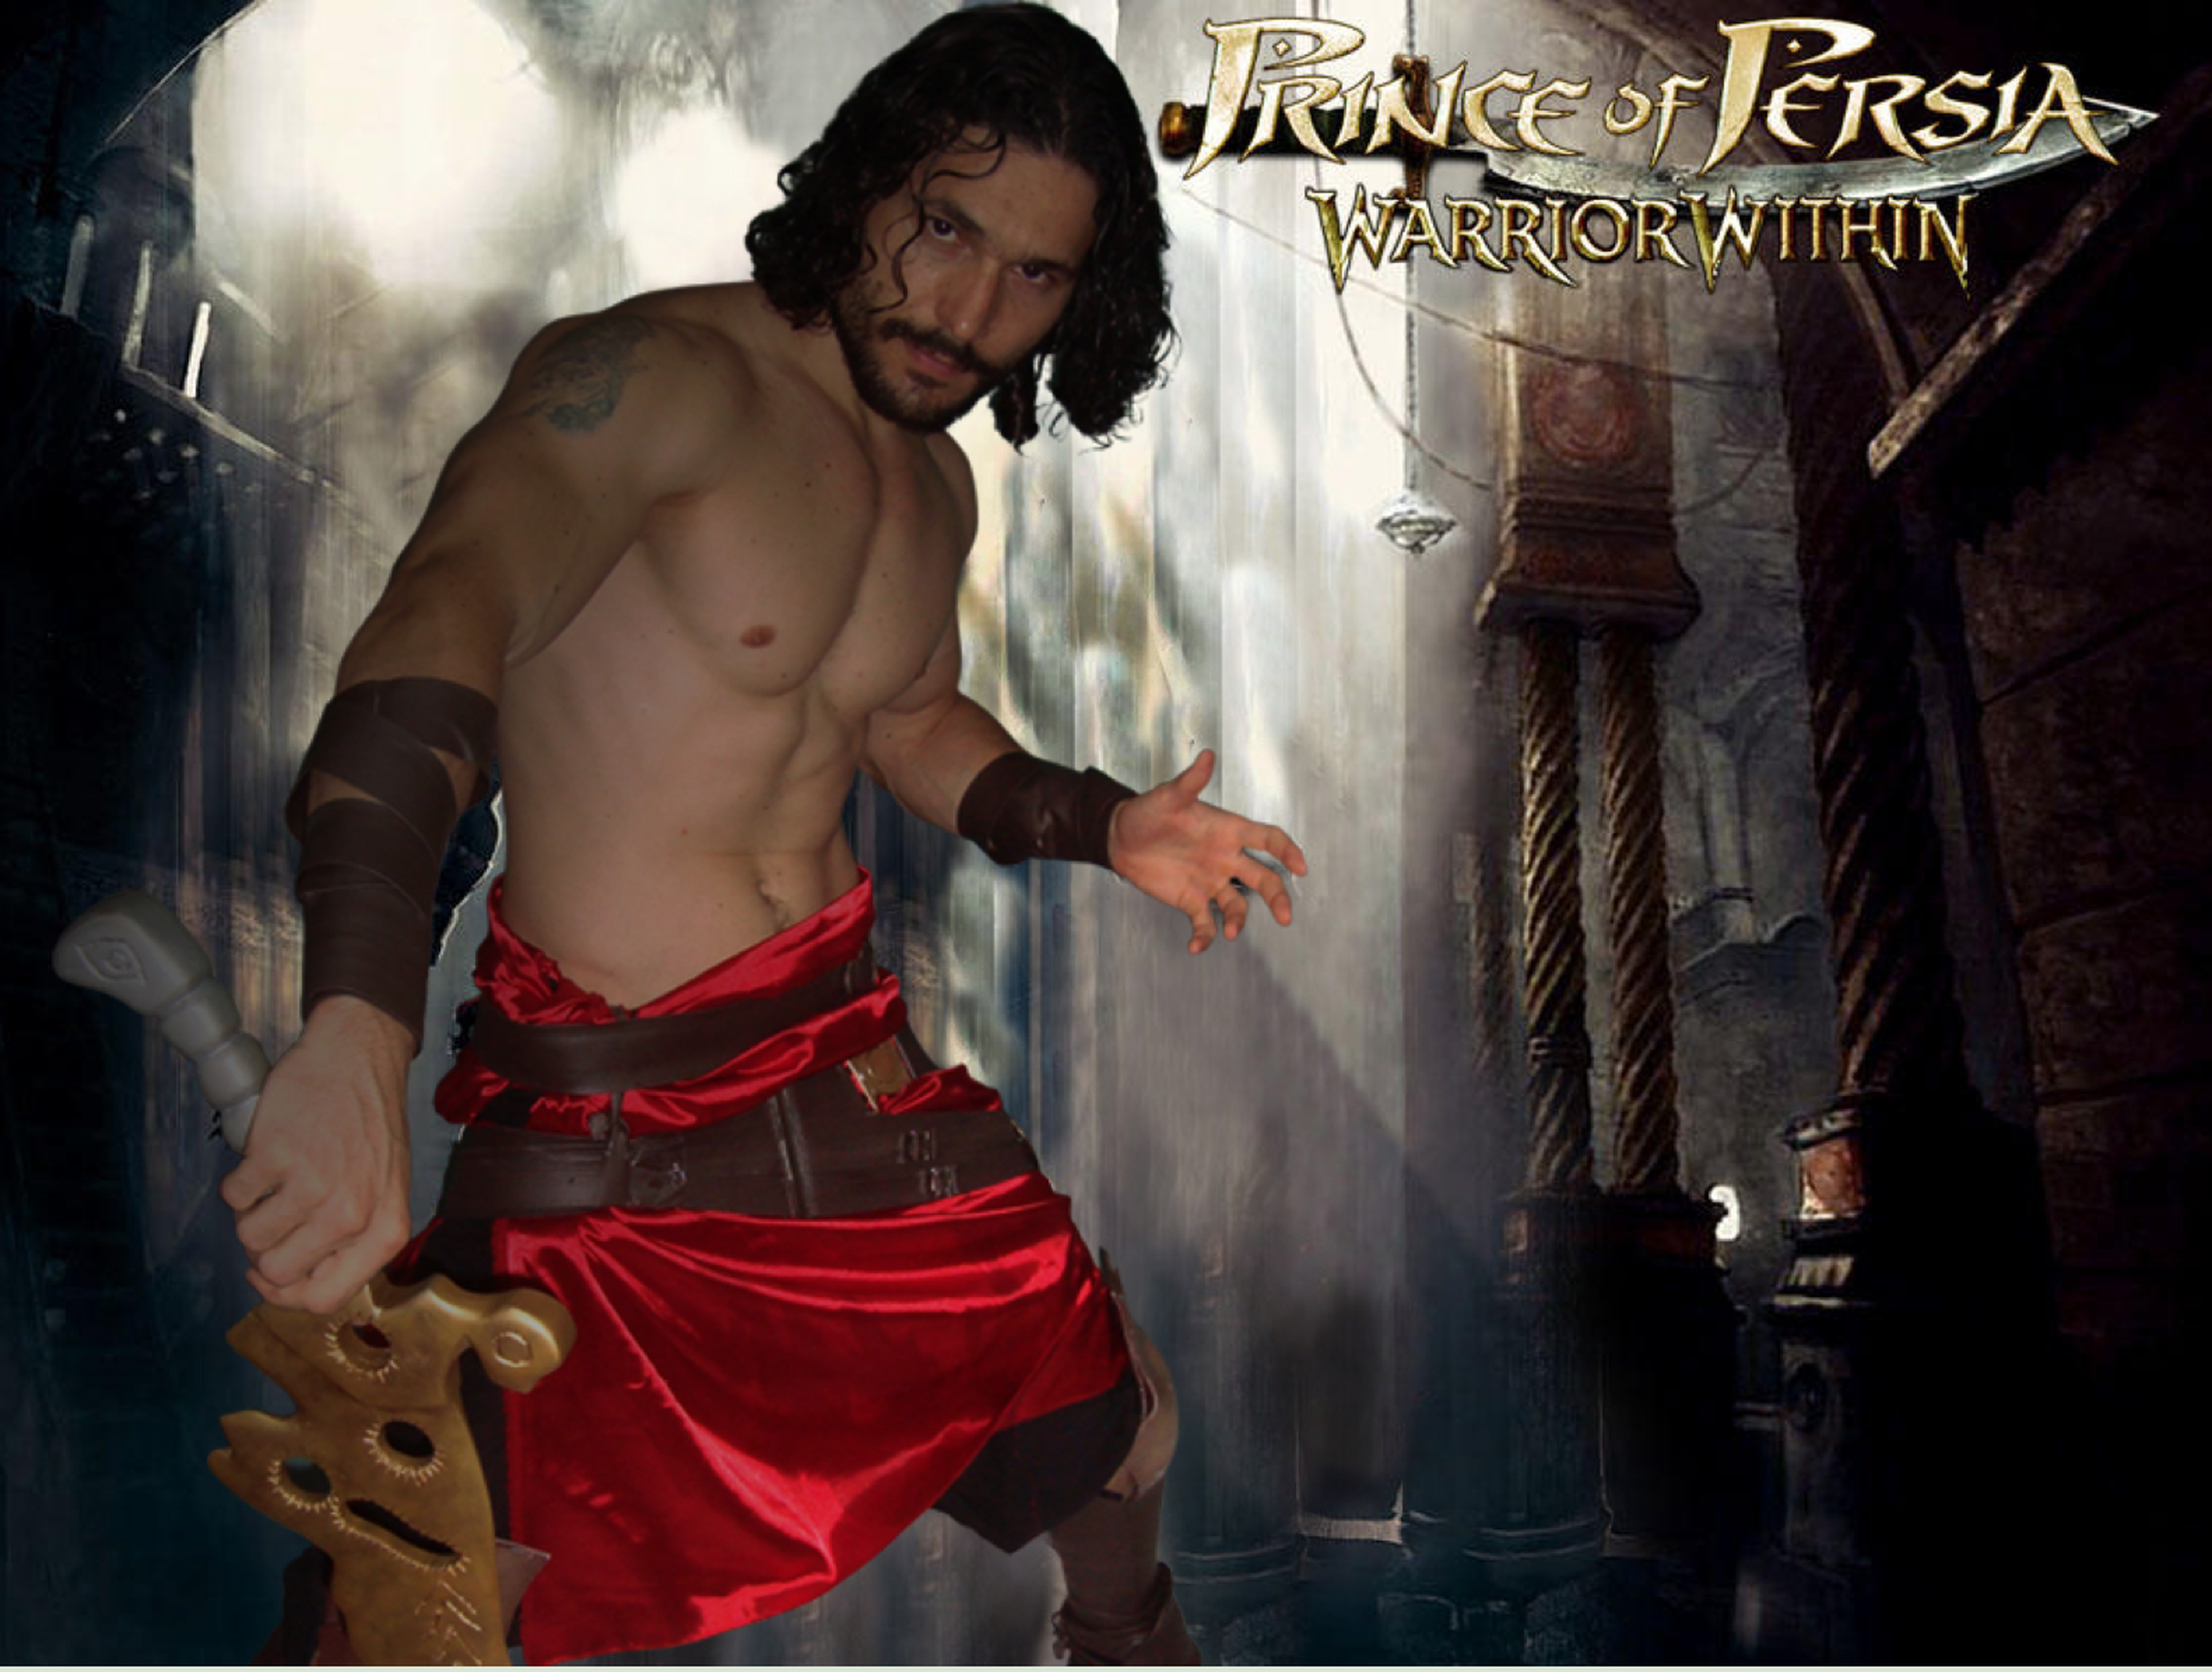 Top chicos: Prince of Persia